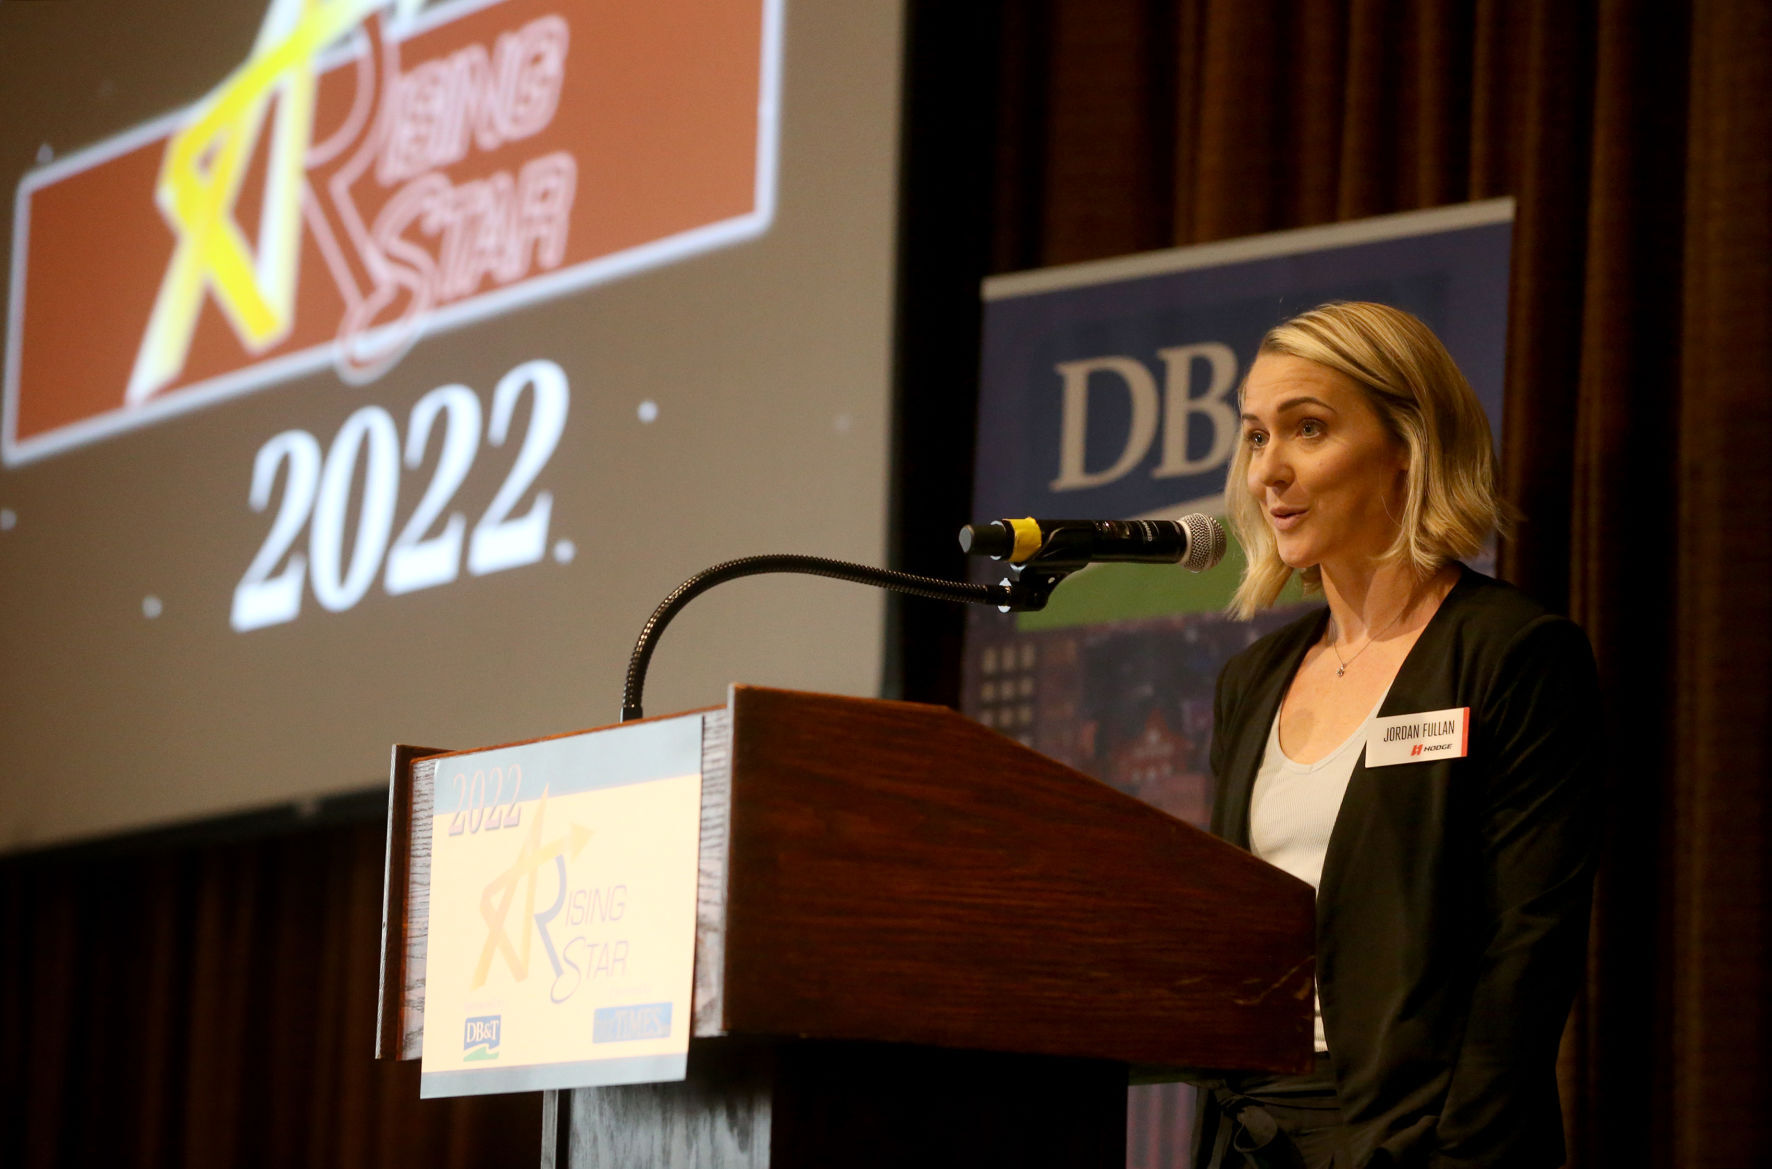 Keynote speaker Jordan Fullan speaks during the Rising Stars breakfast at Diamond Jo Casino in Dubuque on Wednesday, Sept. 14, 2022. The event was presented by bizTimes.biz and sponsored by Dubuque Bank and Trust.    PHOTO CREDIT: JESSICA REILLY